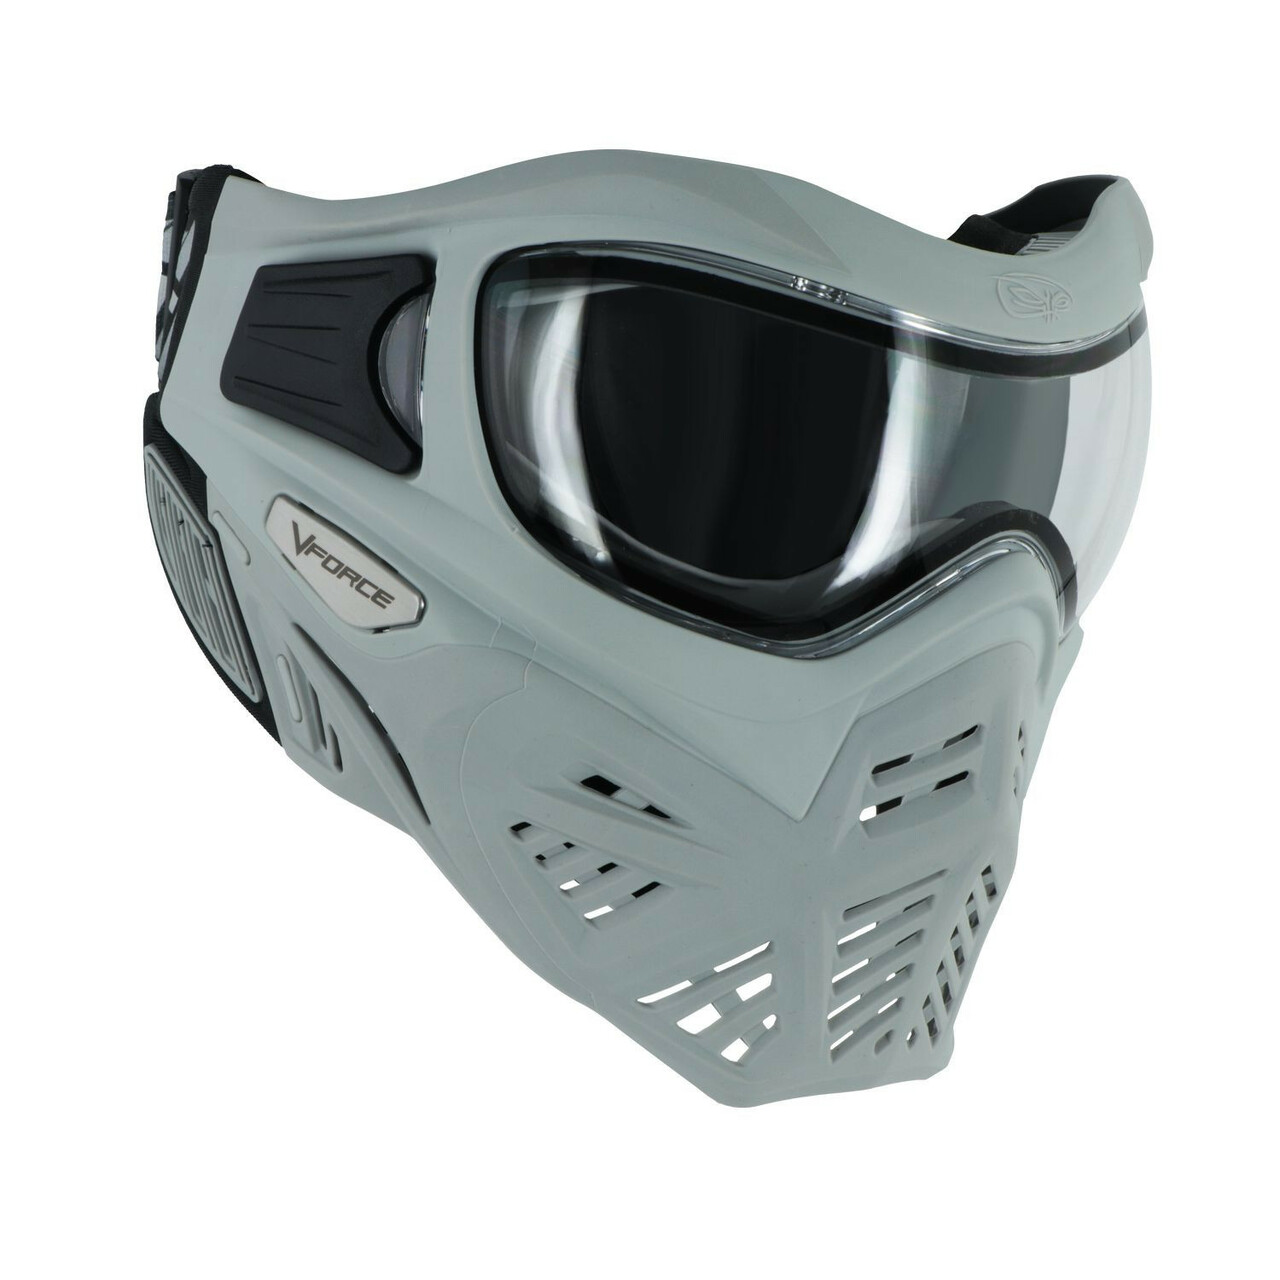 V-Force Grill 2.0 Paintball Goggles, Shark, Black / Grey